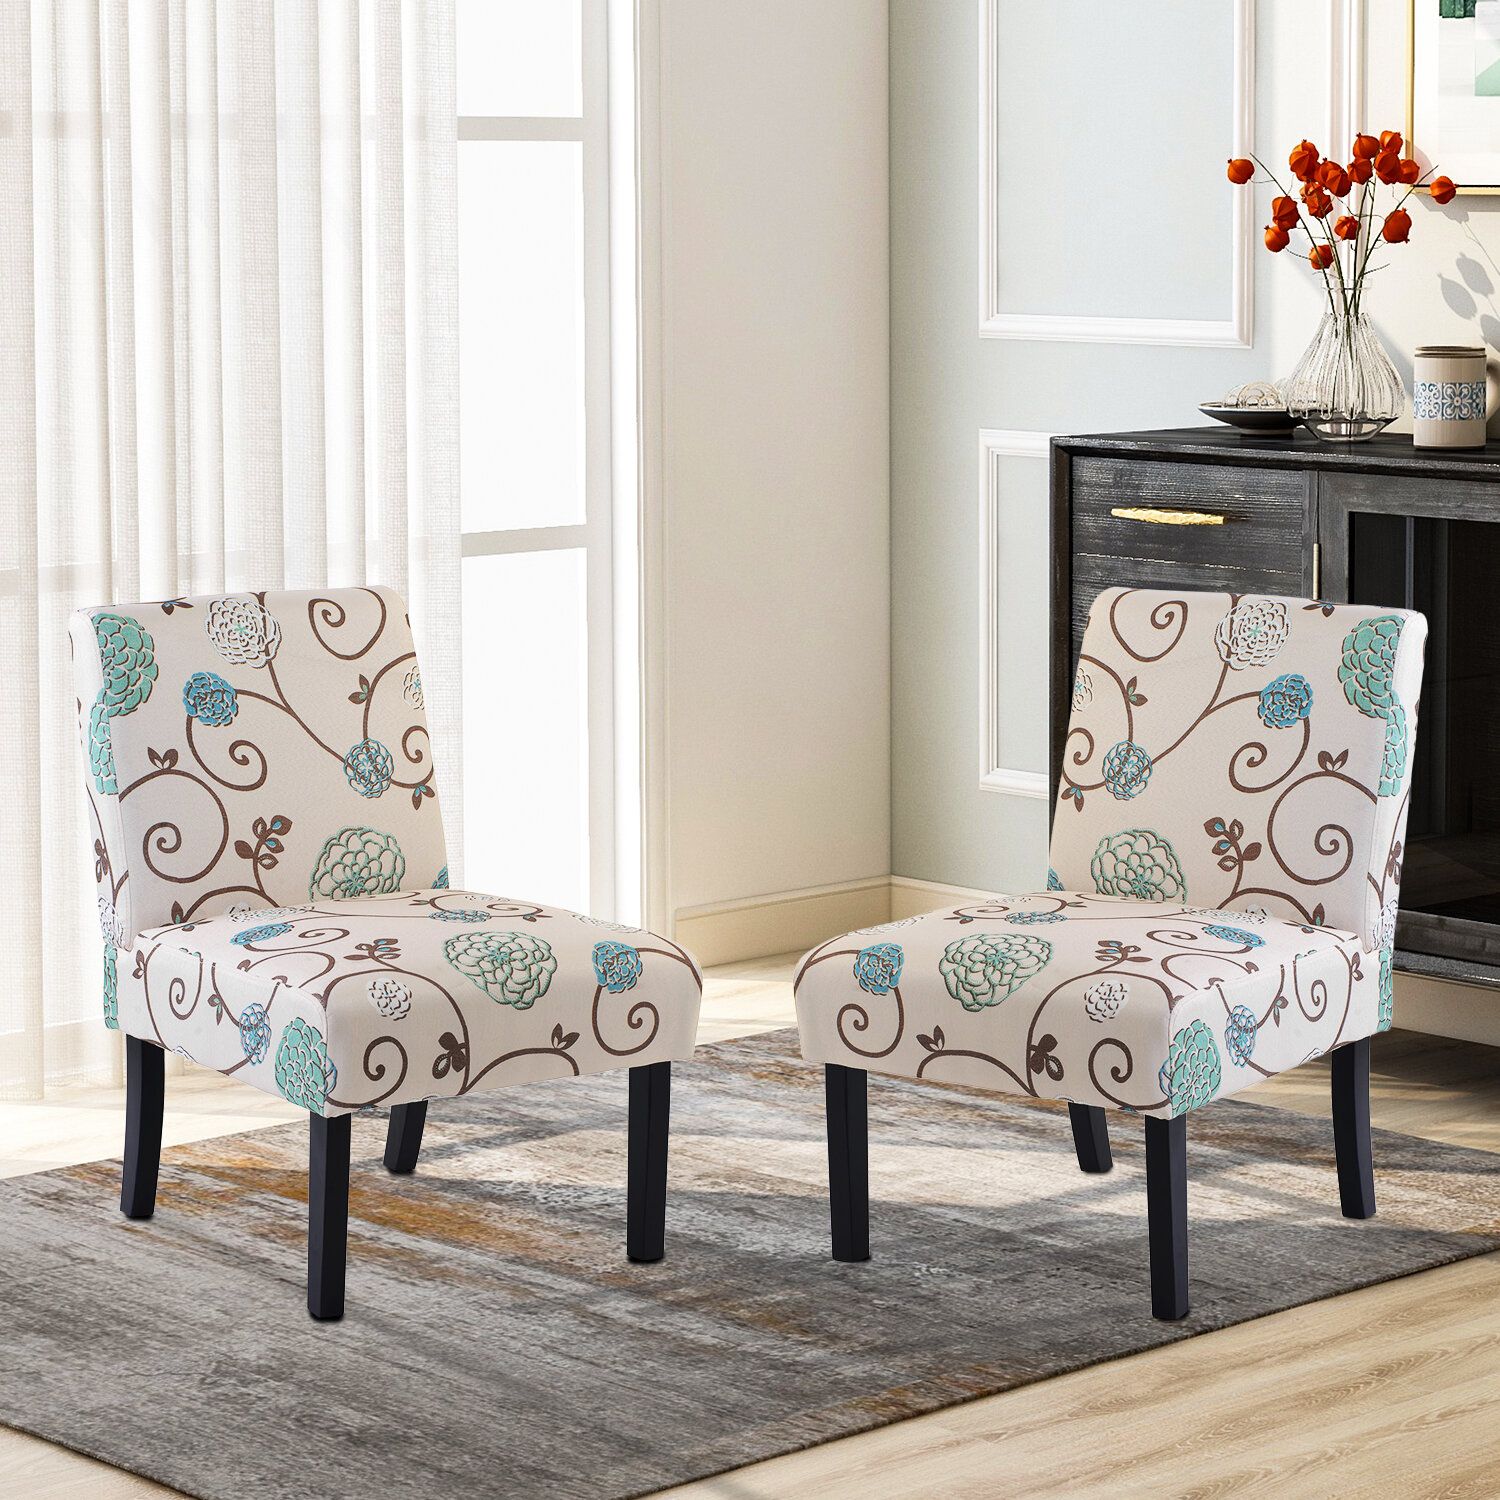 Alush Accent Slipper Chair Intended For Alush Accent Slipper Chairs (Set Of 2) (Photo 1 of 15)